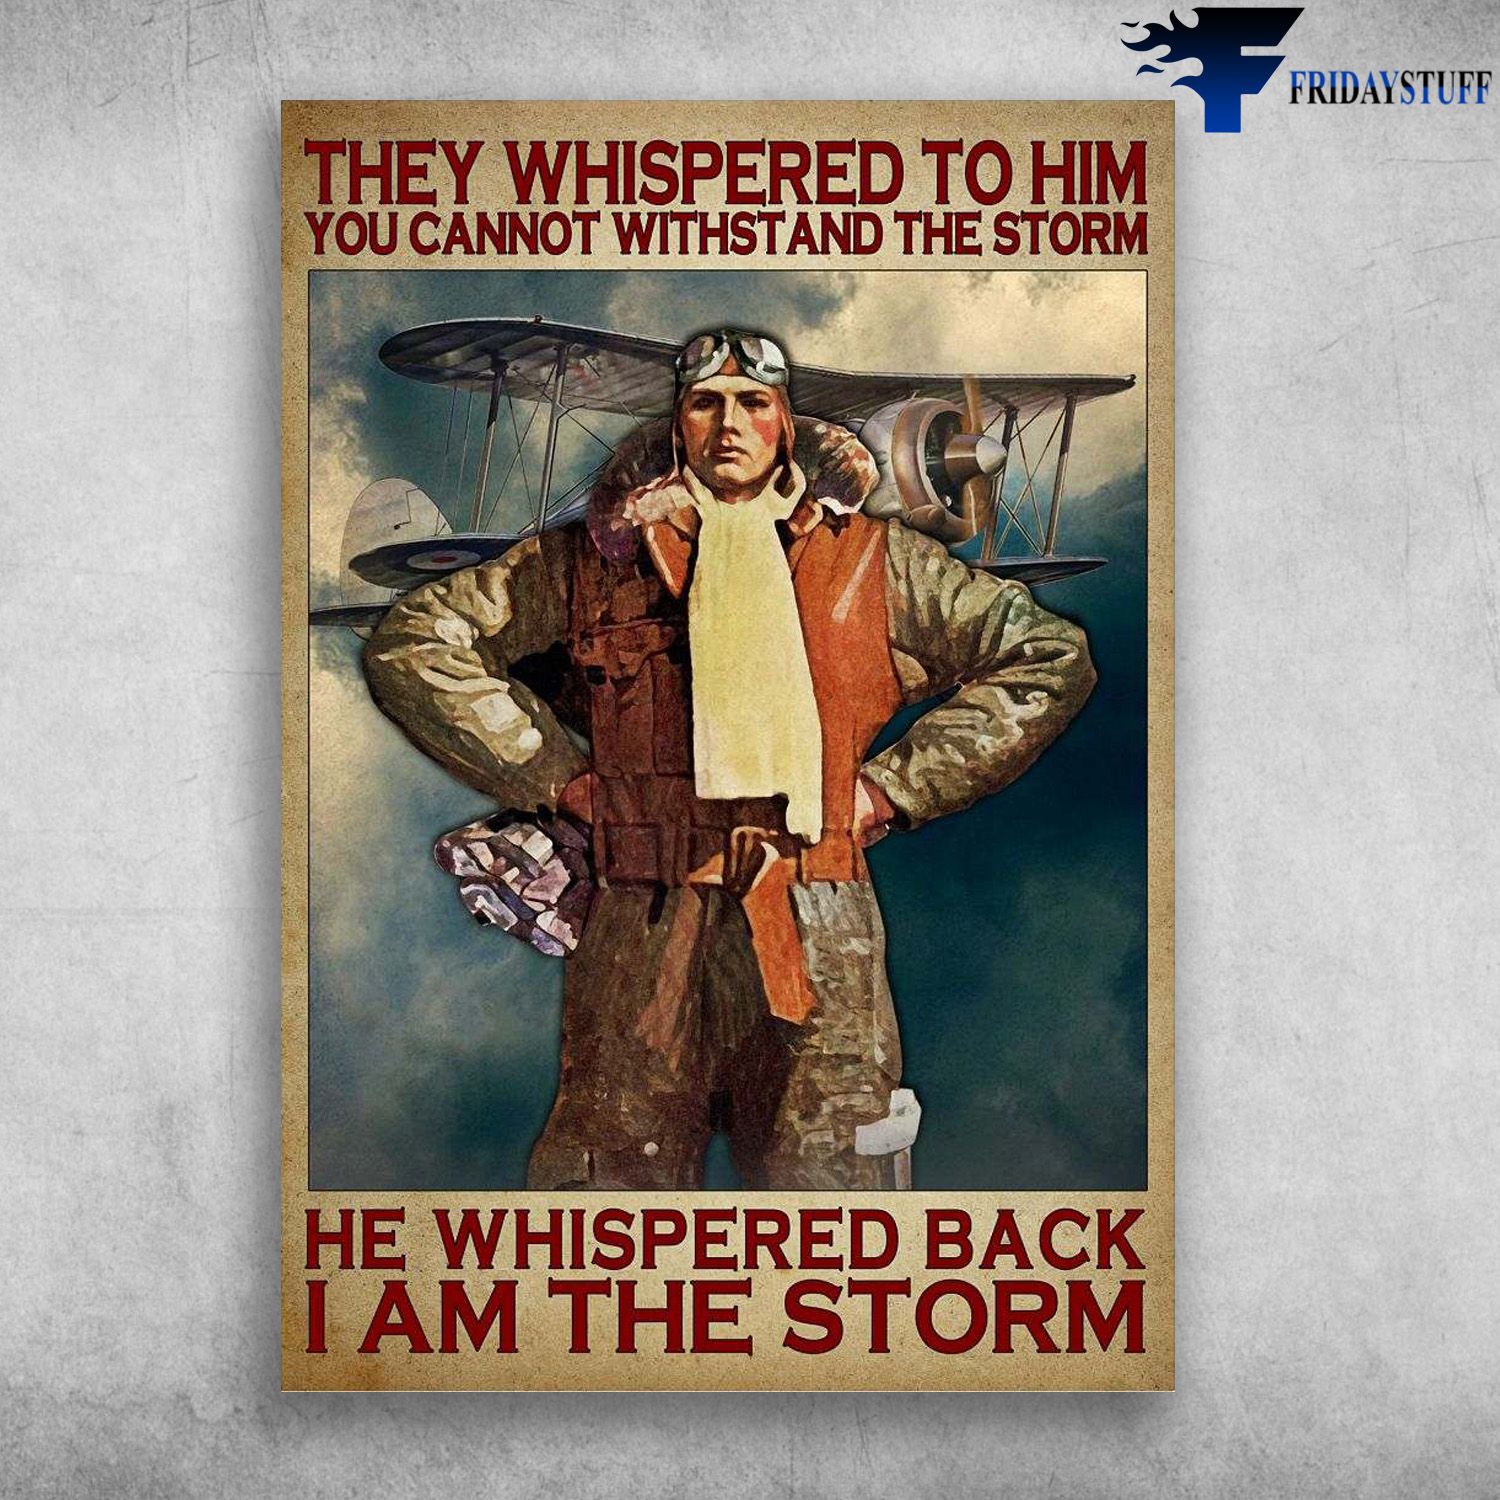 Pilot Man, Pilot Aircraft - They Whispered To Him, You Cannot Withstand The Storm, He Whispered Back, I Am The Storm